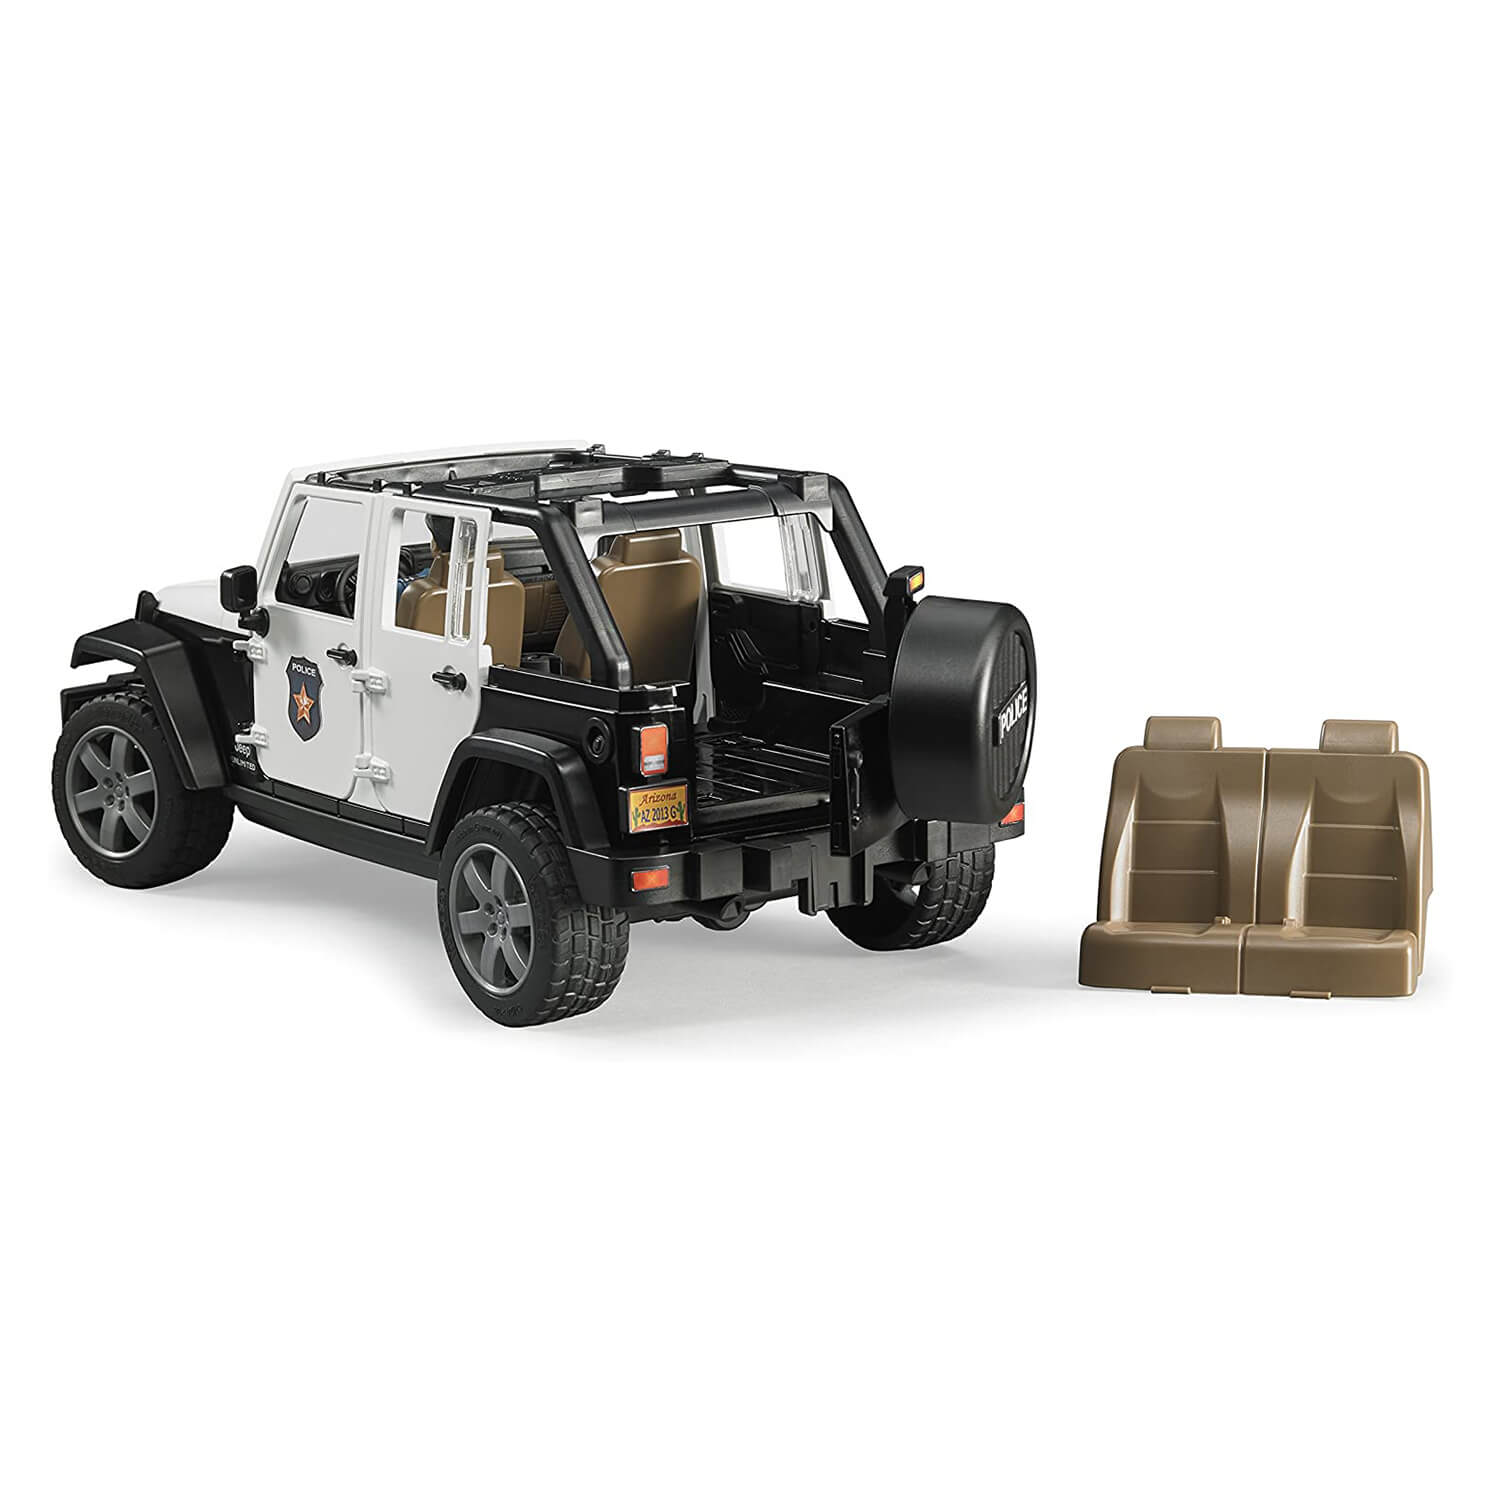 Back and interior view of the Bruder Pro Series Jeep Rubicon Police 1:16 Scale Vehicle w Policeman.